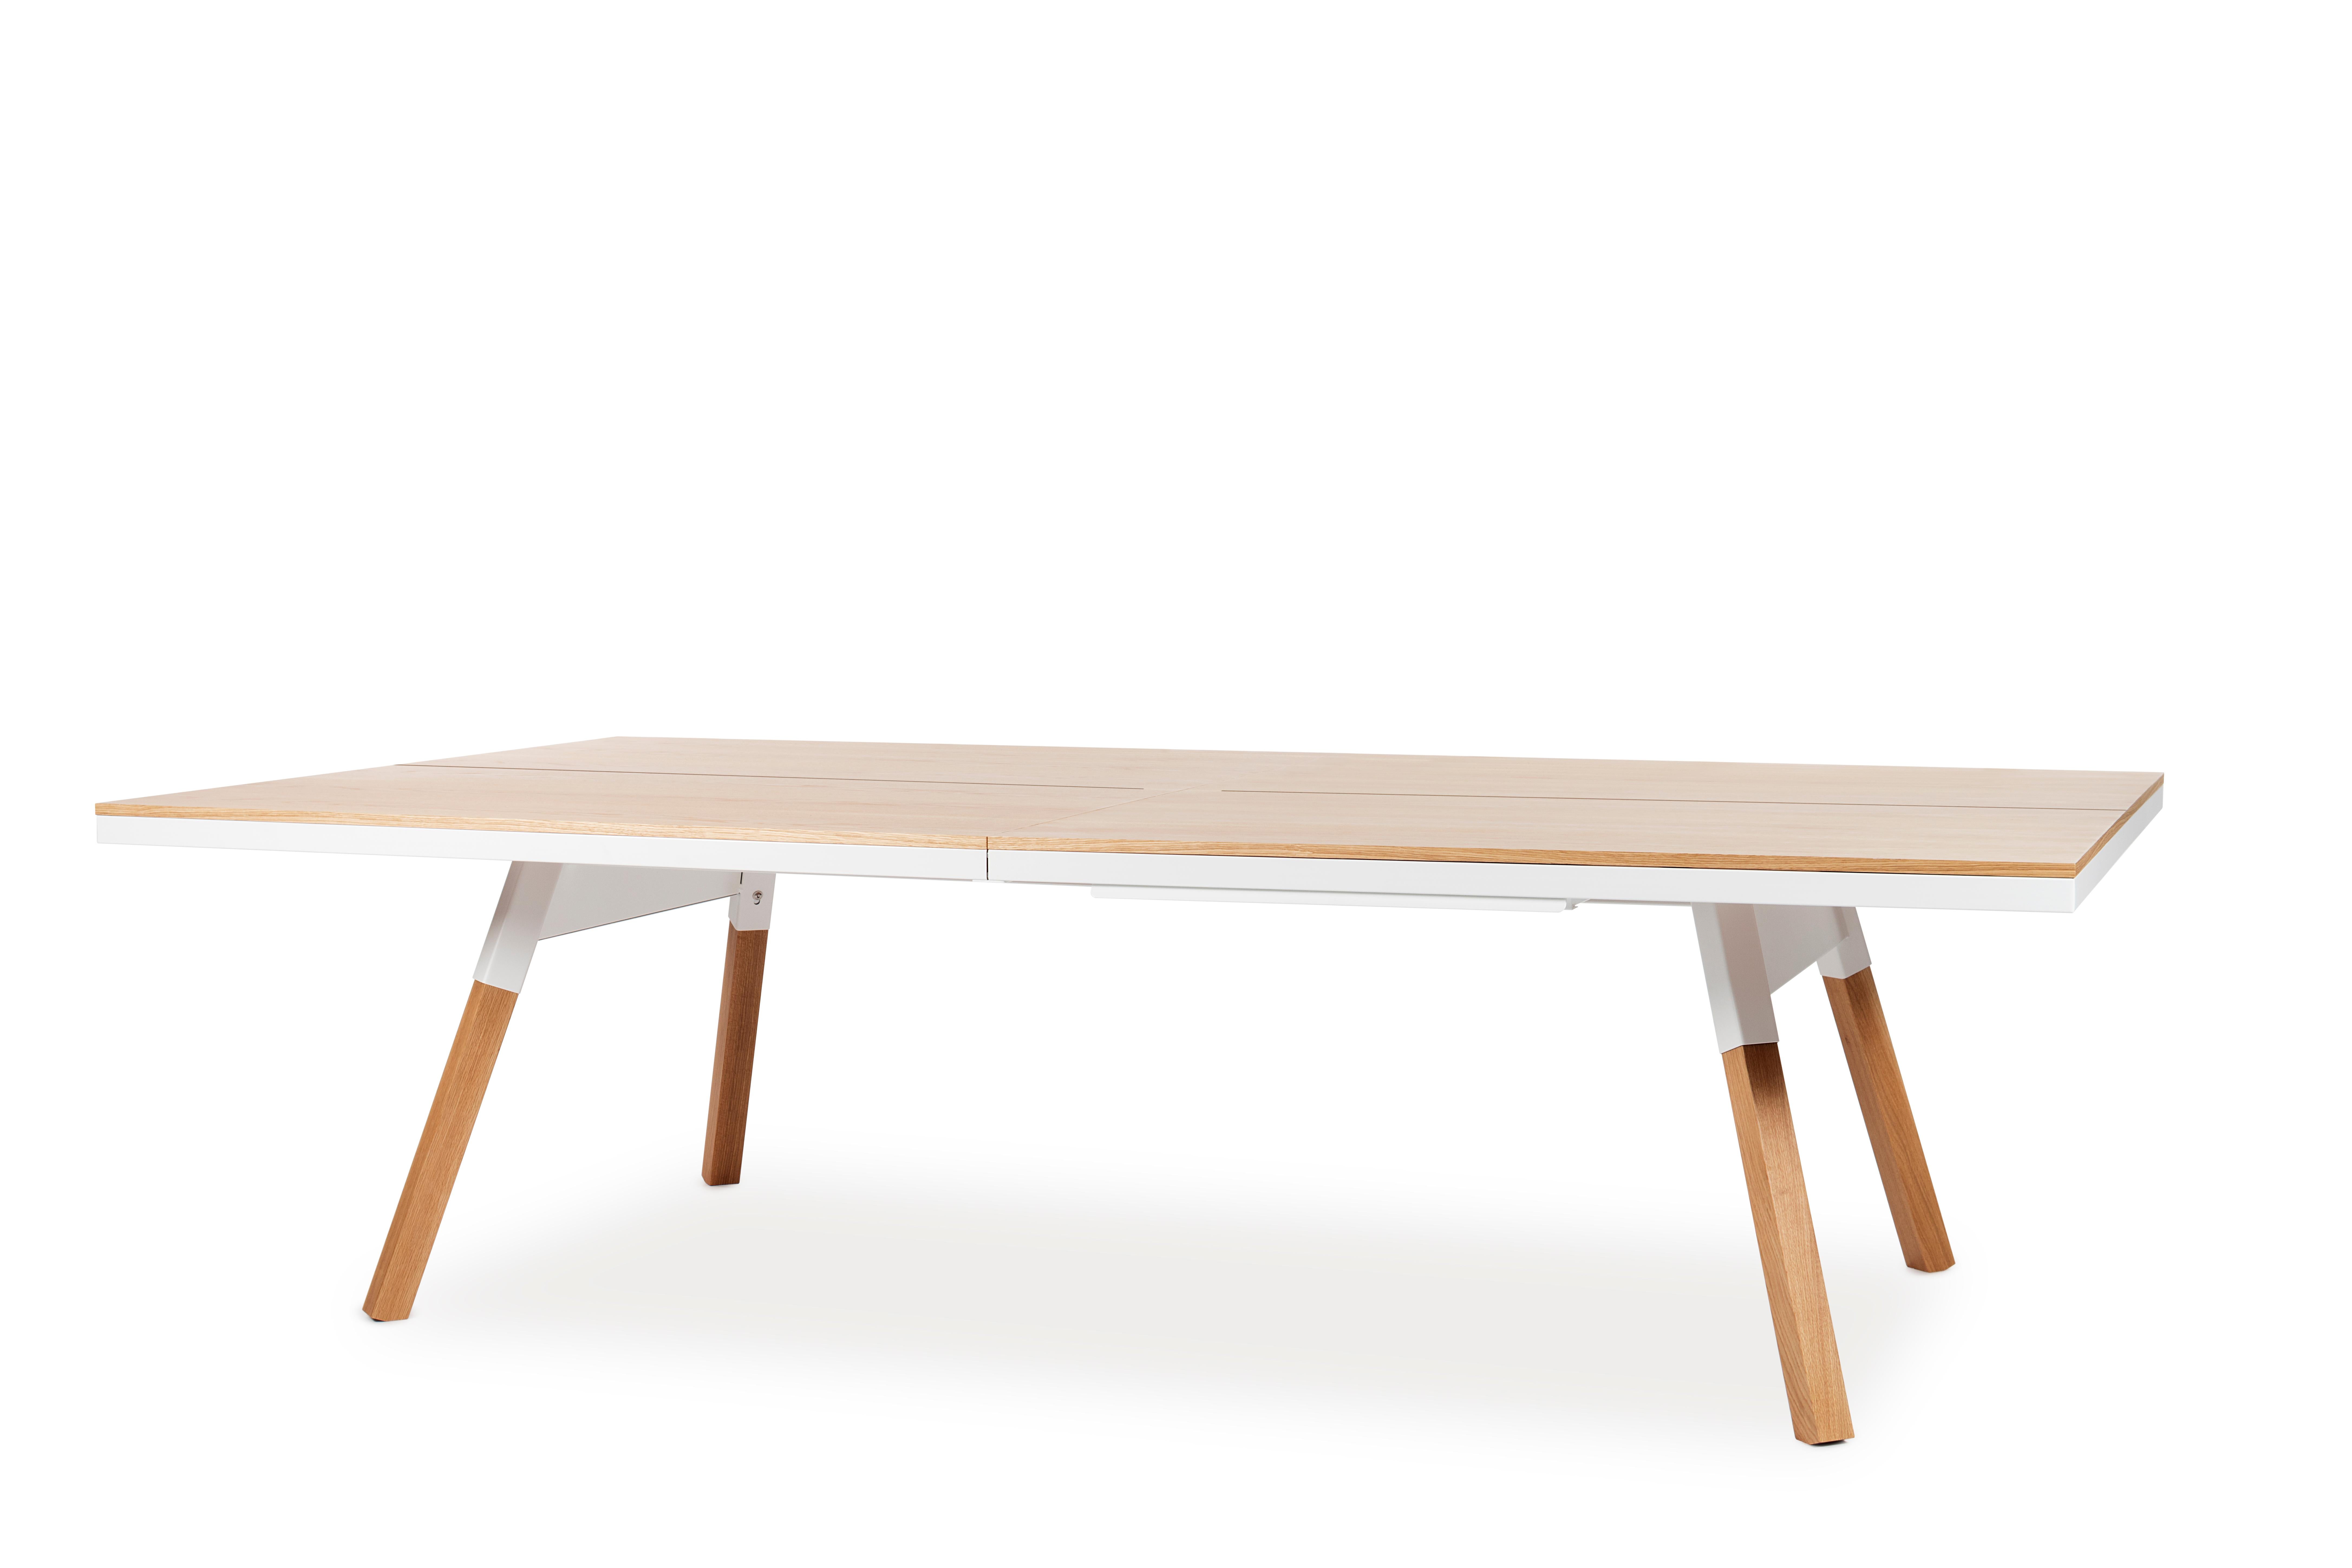 With our wood topped You and Me ping-pong table, we’ve taken our playful attitude indoors. Wood offers comfort and elegance, while sportiness blends in seamlessly in new settings. There’s a place for everything with a You and Me. There’s a place for